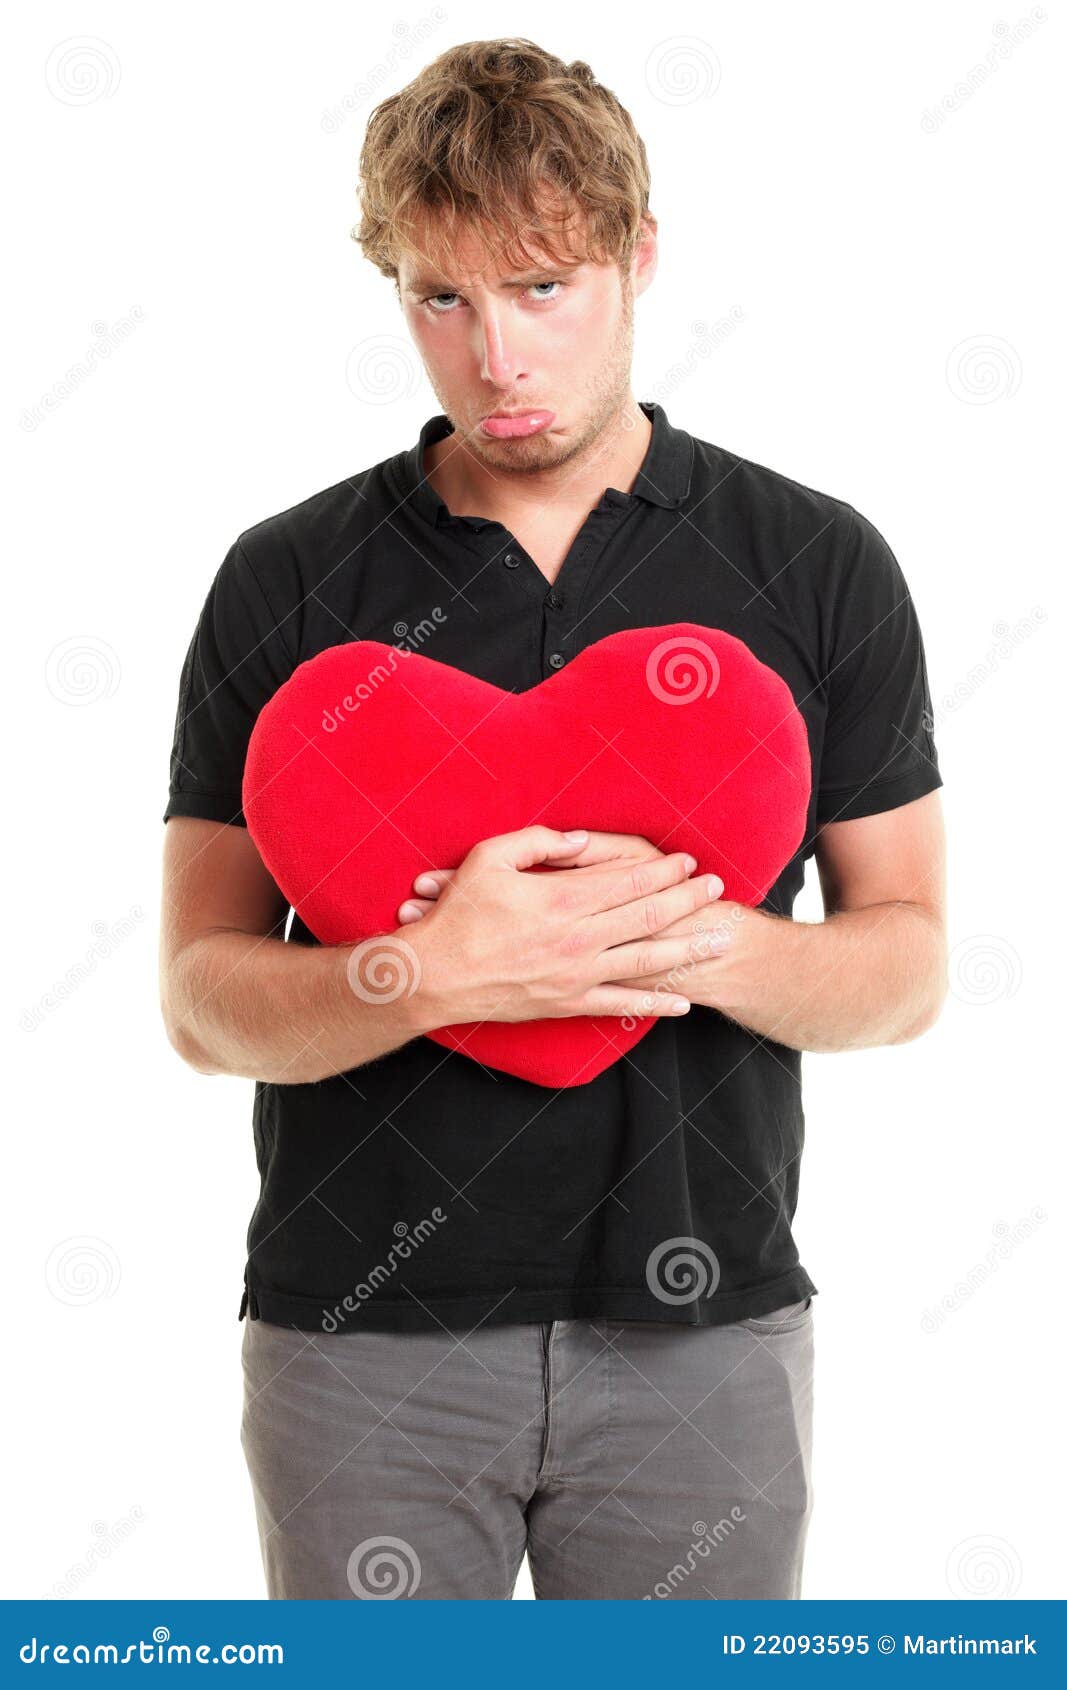 Unhappy Broken Heart Valentines Day Man Stock Image - Image of ...